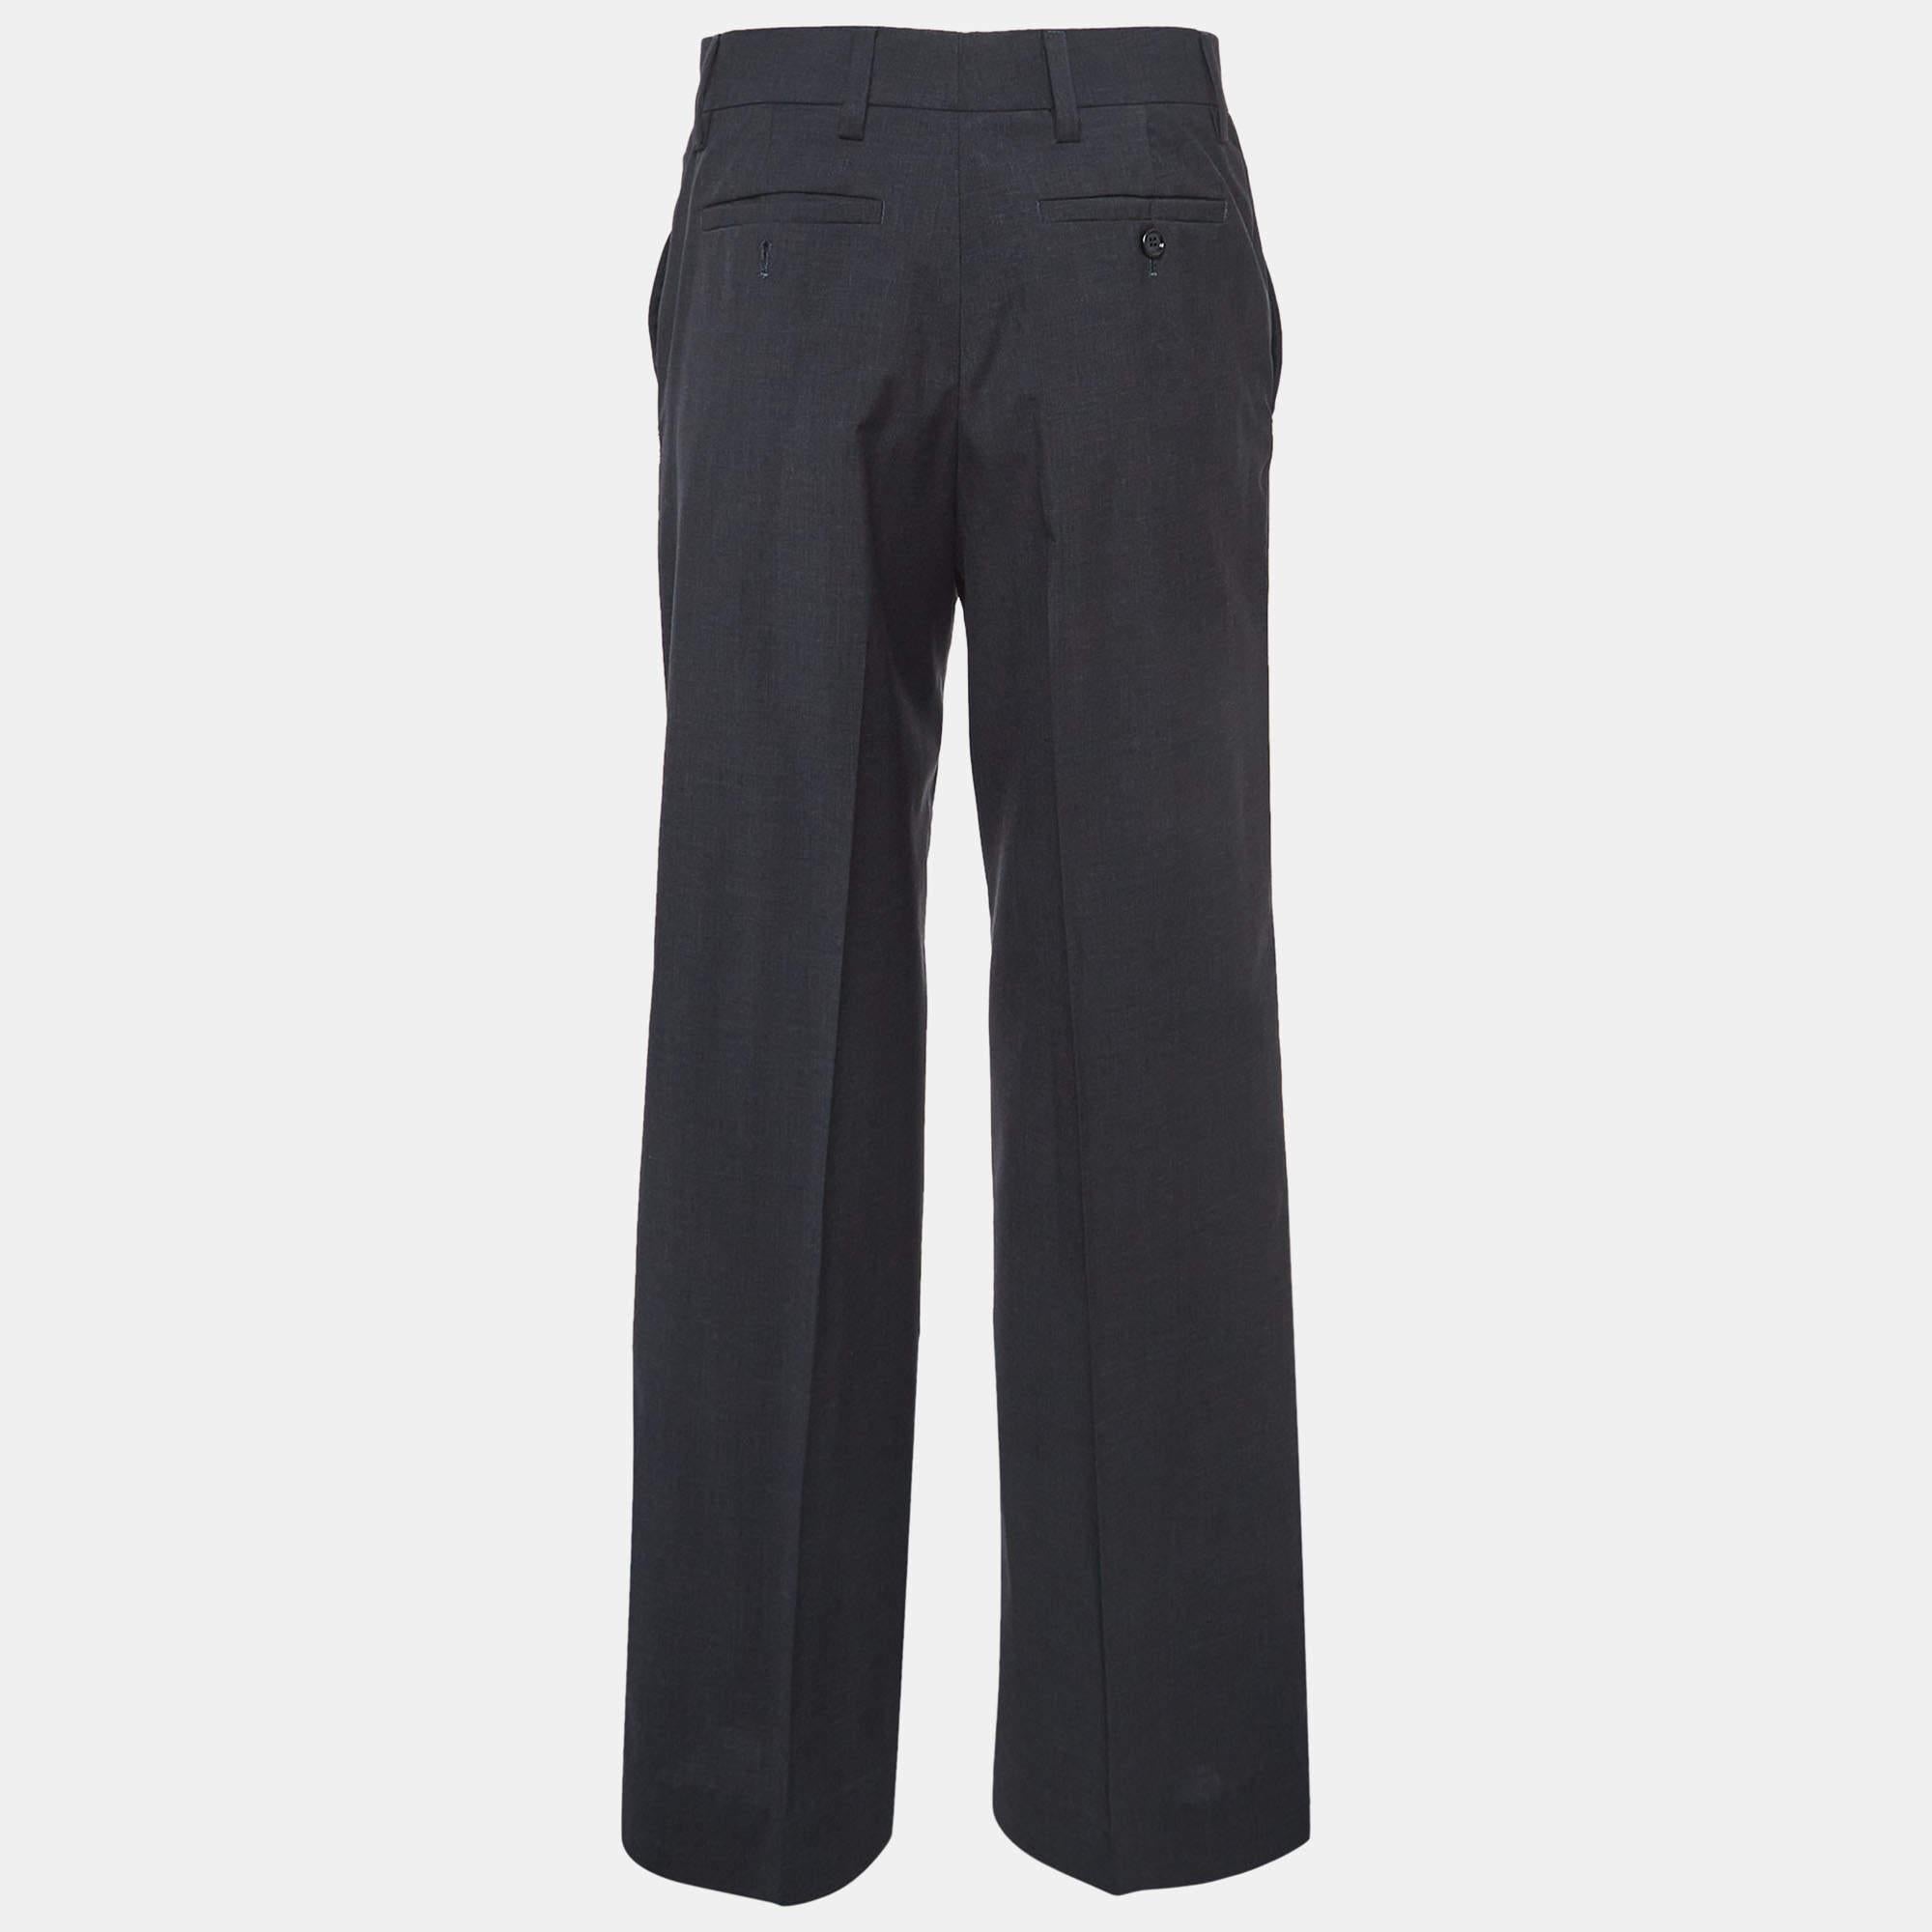 Enhance your formal attire with this pair of Prada pants. Designed into a superb silhouette and fit, this pair of pants will definitely make you look elegant.

Includes: Tag